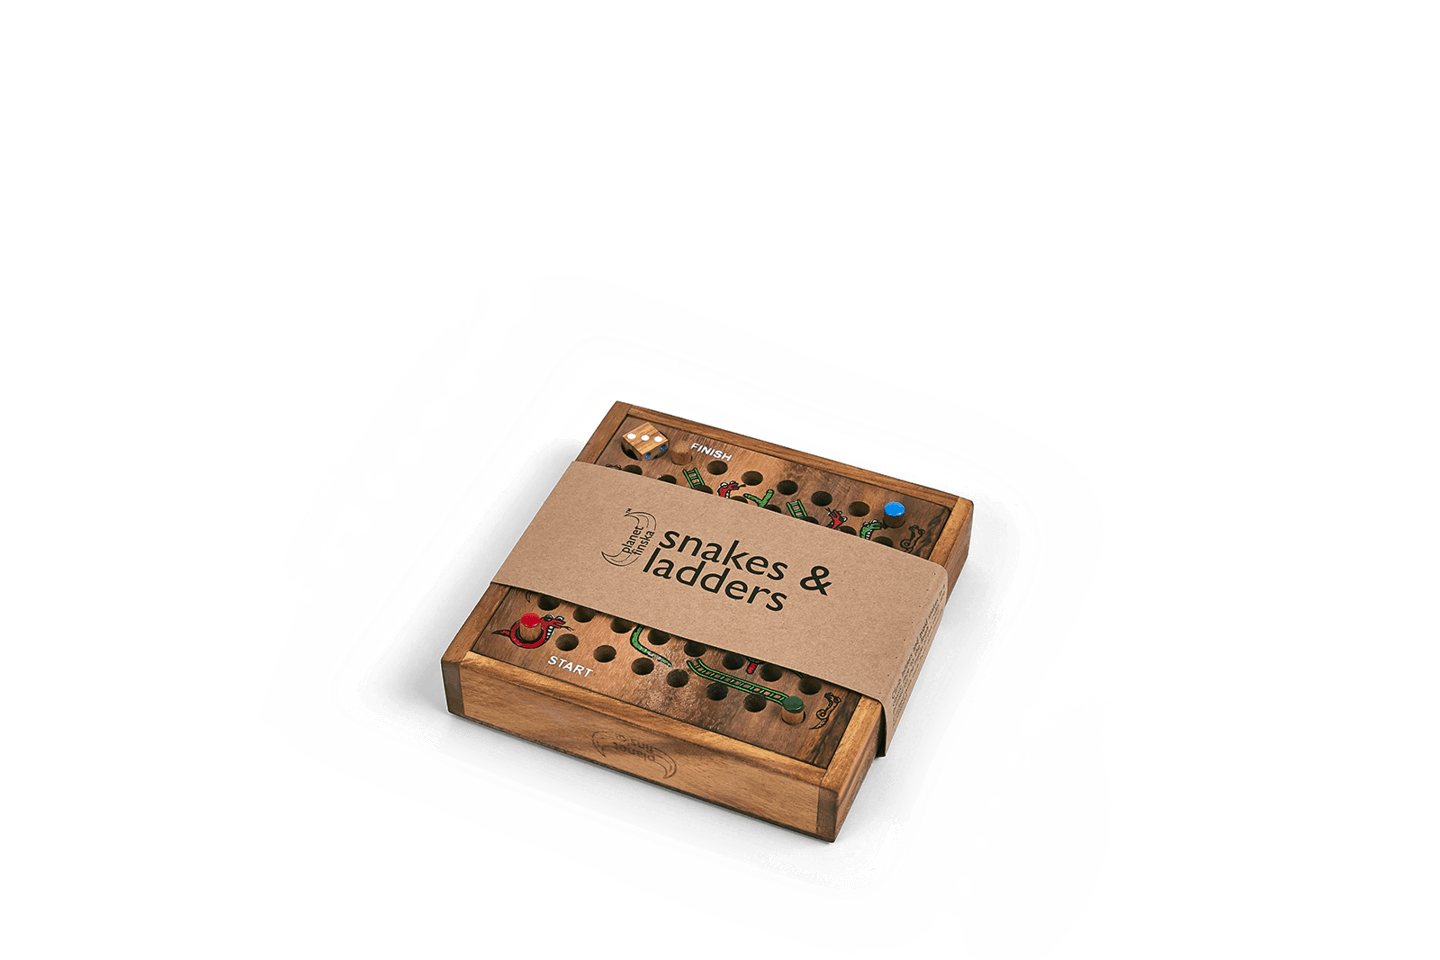 Travel Snakes and Ladders - Handworks Nouveau Paperie